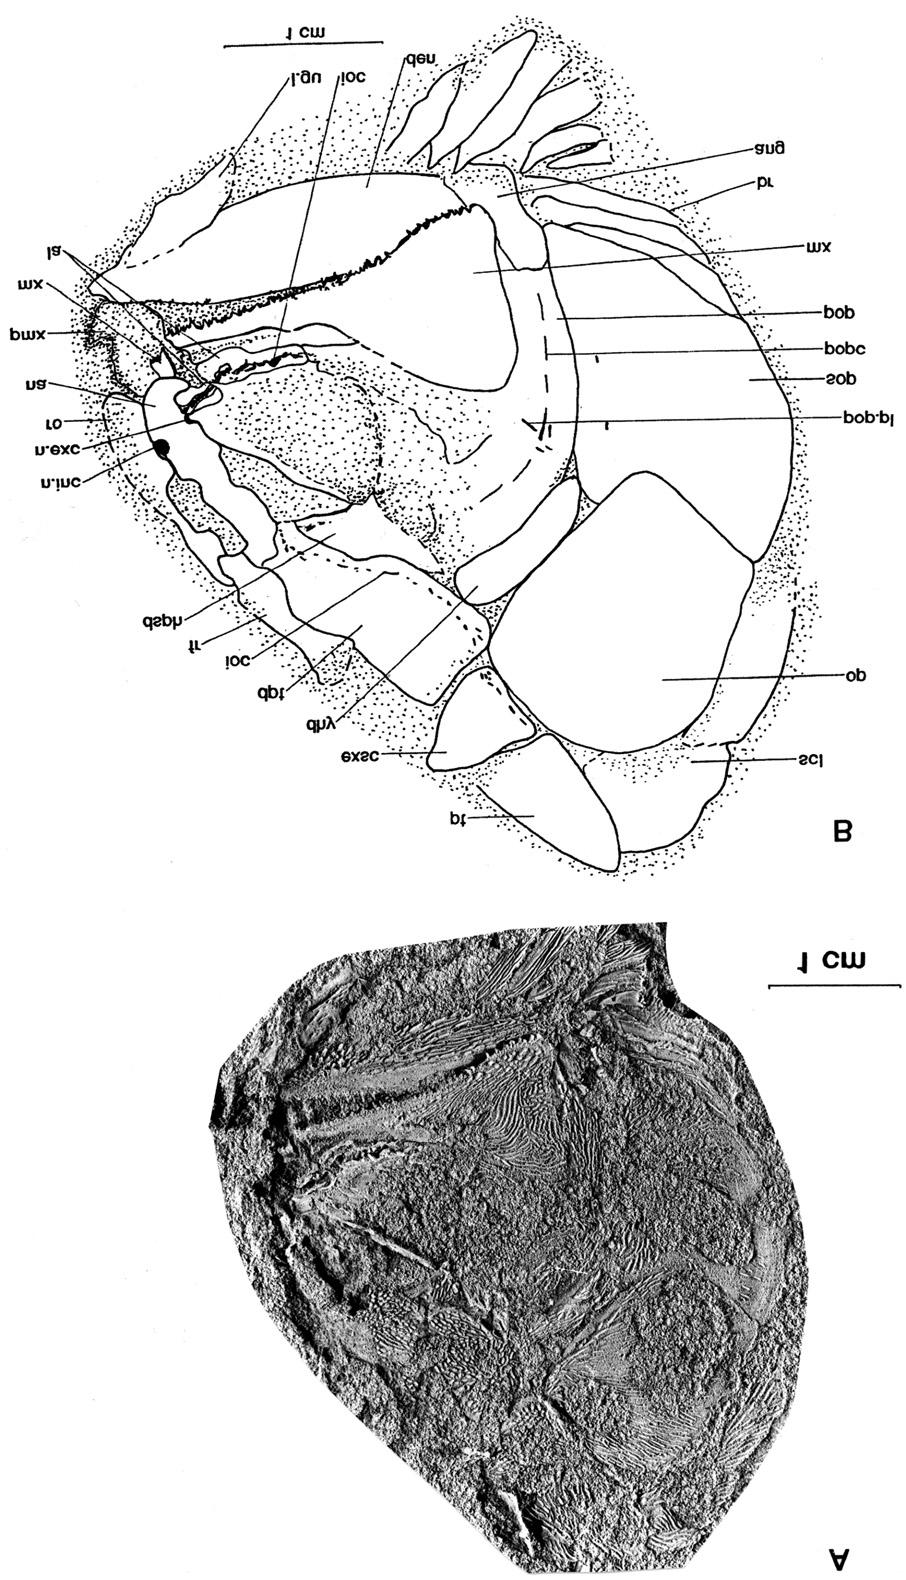 Figure 2. Blourugia seeleyi paratype AK/76/1. A, Photograph in lateral view showing cheek and snout region detail. B, Camera lucida reconstruction.